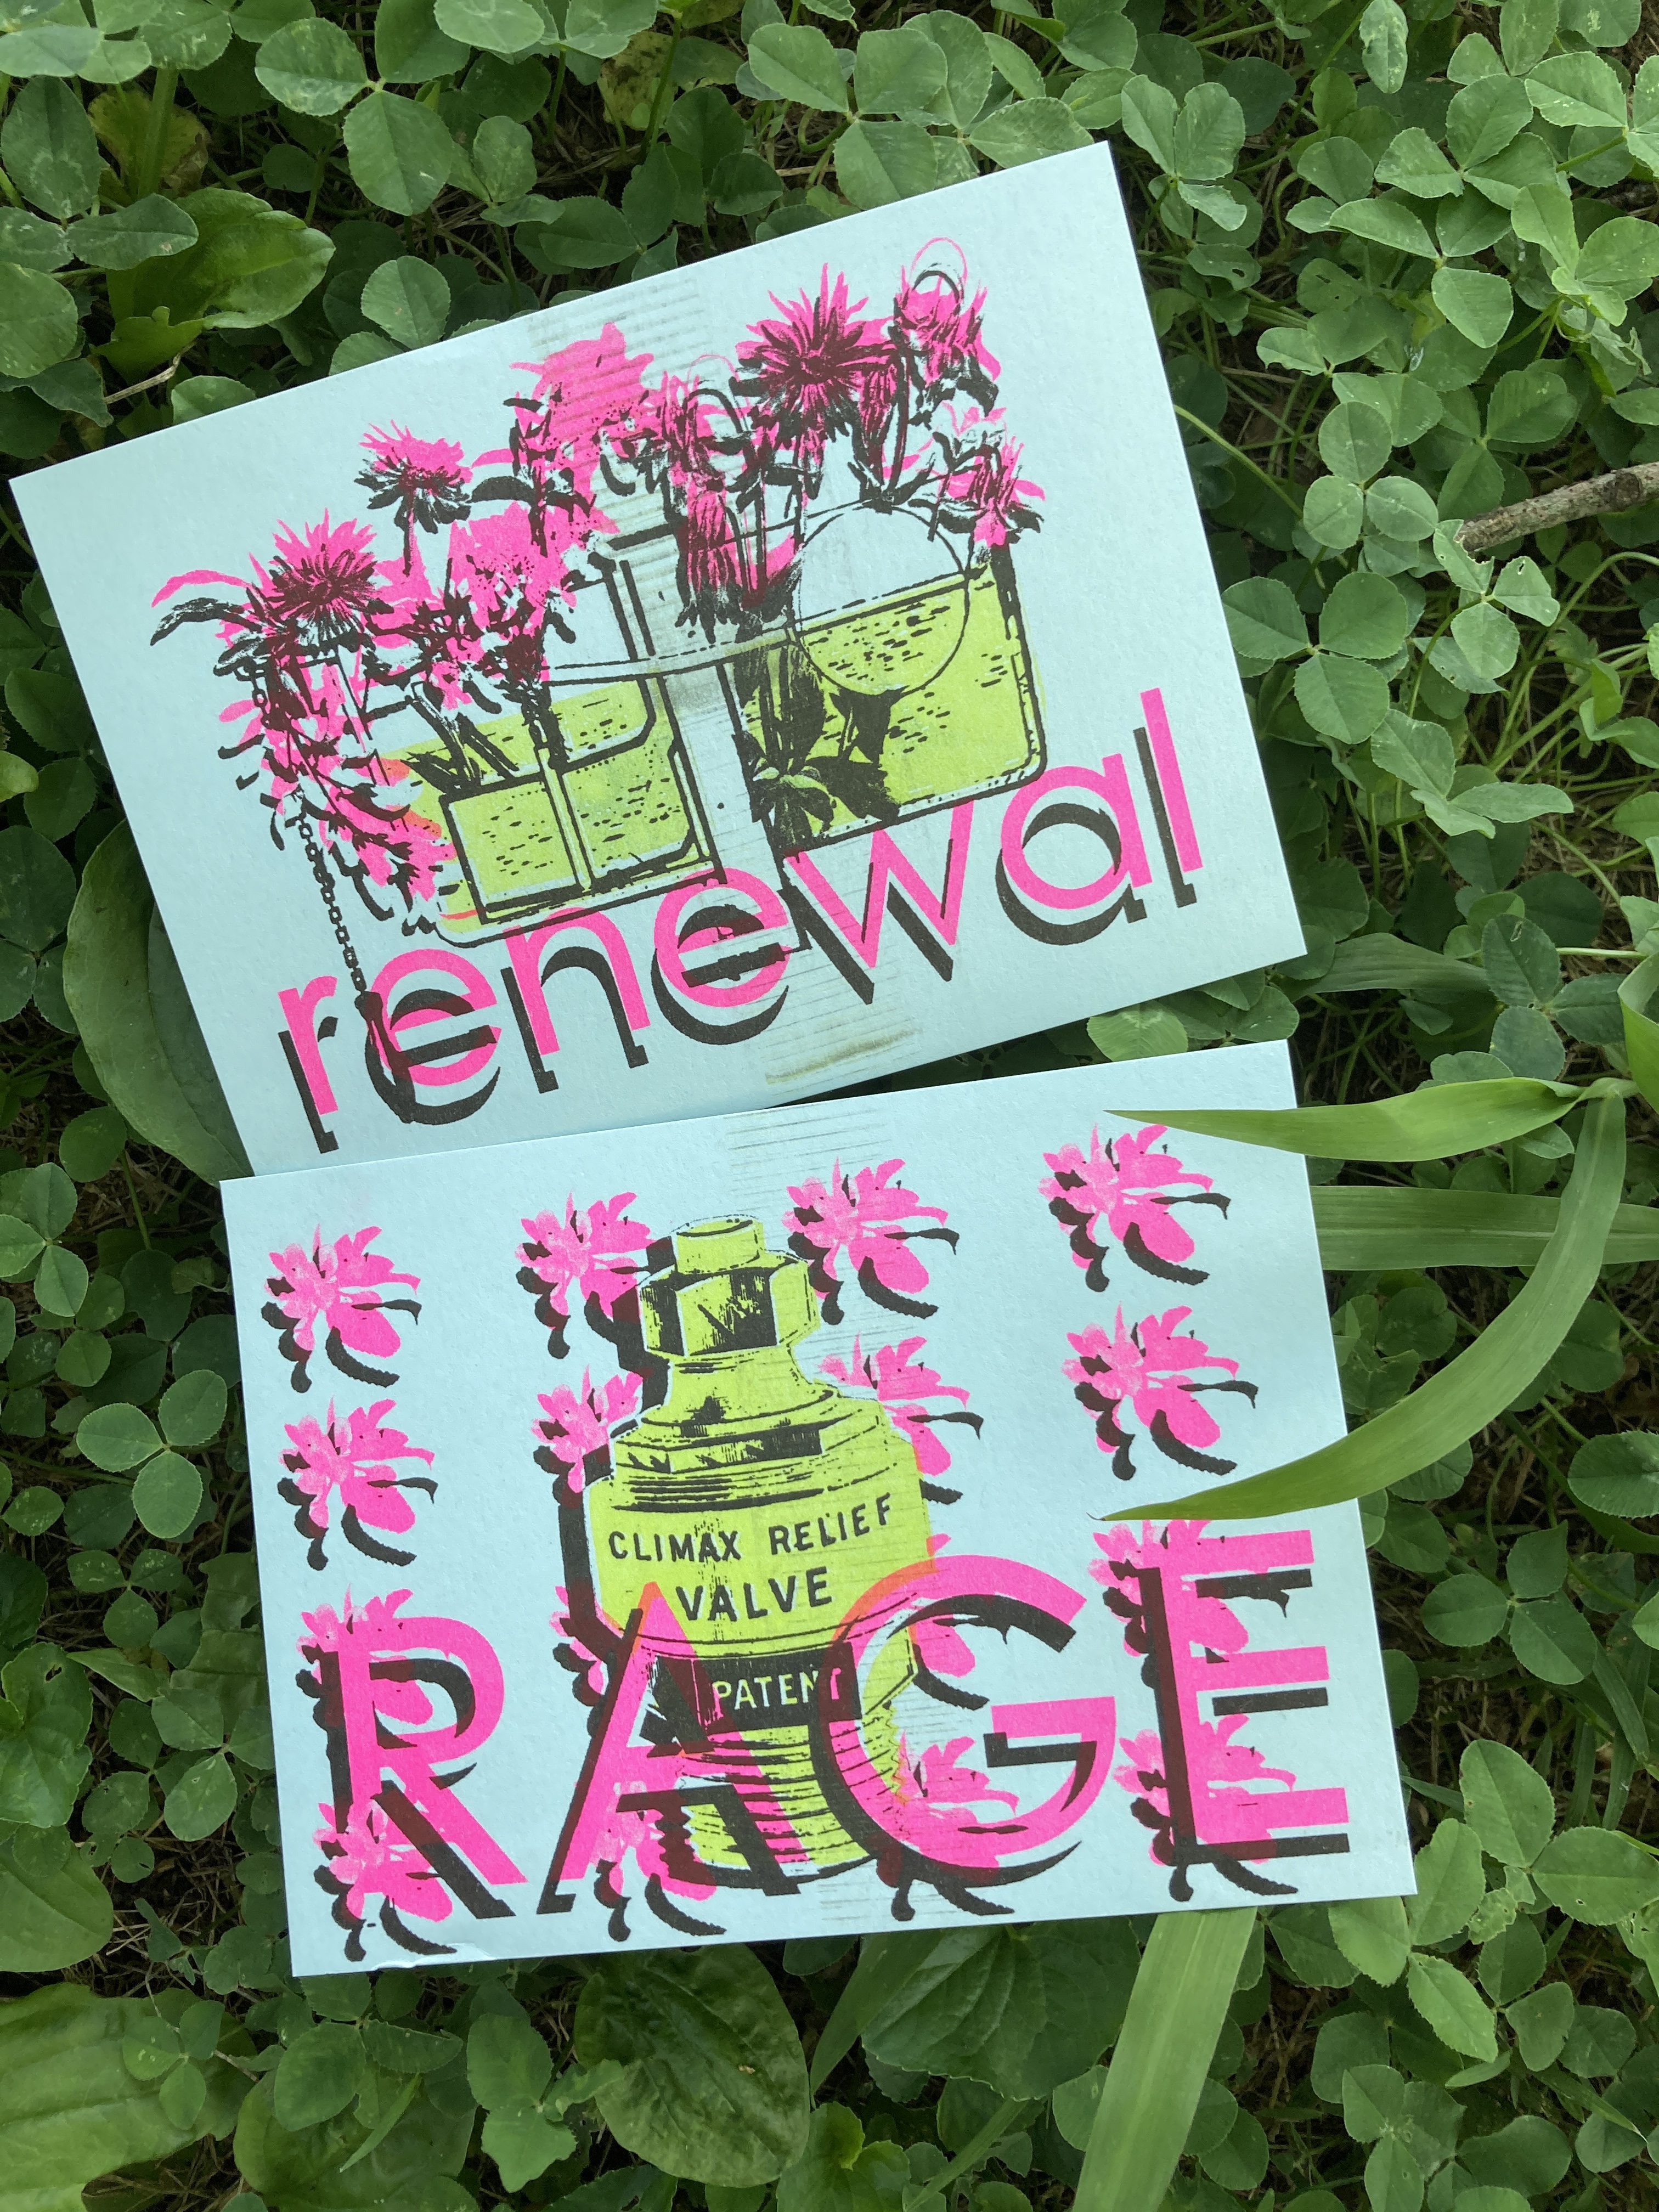 Two postcards in the grass. One says "rage" and has a floral background and a valve that says "climax relief valve." The other says "renewal" and shows flowers growing out of a toilet. Images are in black, neon pink, and neon green.